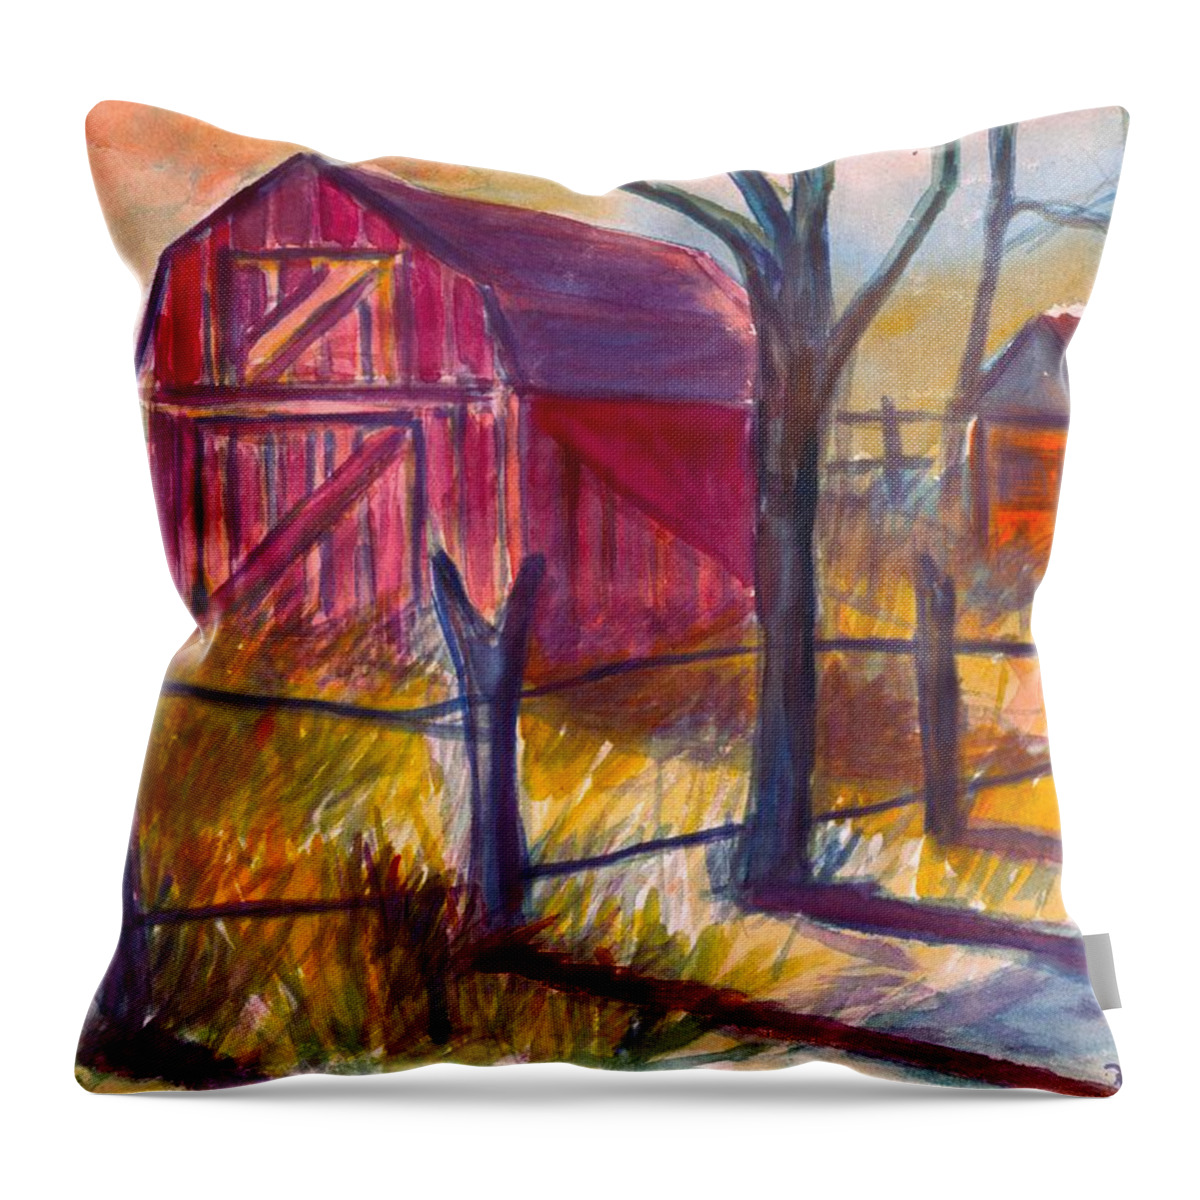 Barn Throw Pillow featuring the painting Roadside Barn by Kendall Kessler